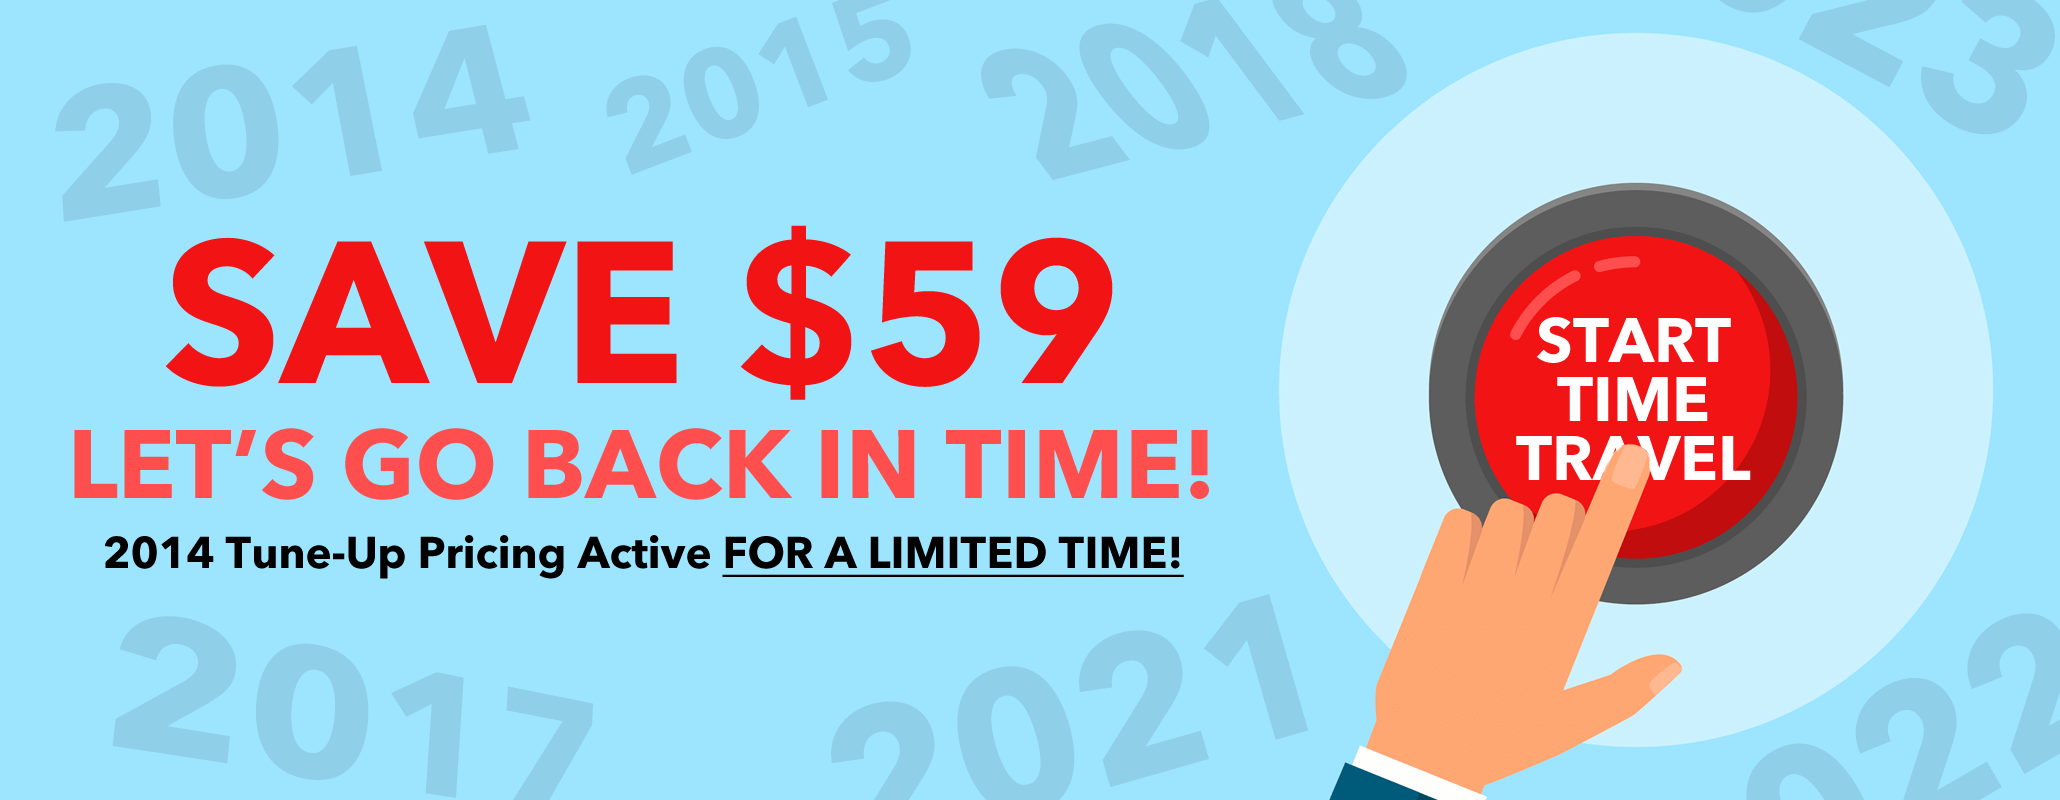 Let's go back in time. Save $59 with our 2014 coupon pricing. Limited time only. Valid on Furnaces, Boilers, Water Heaters, and Aprilaire Tune-Ups